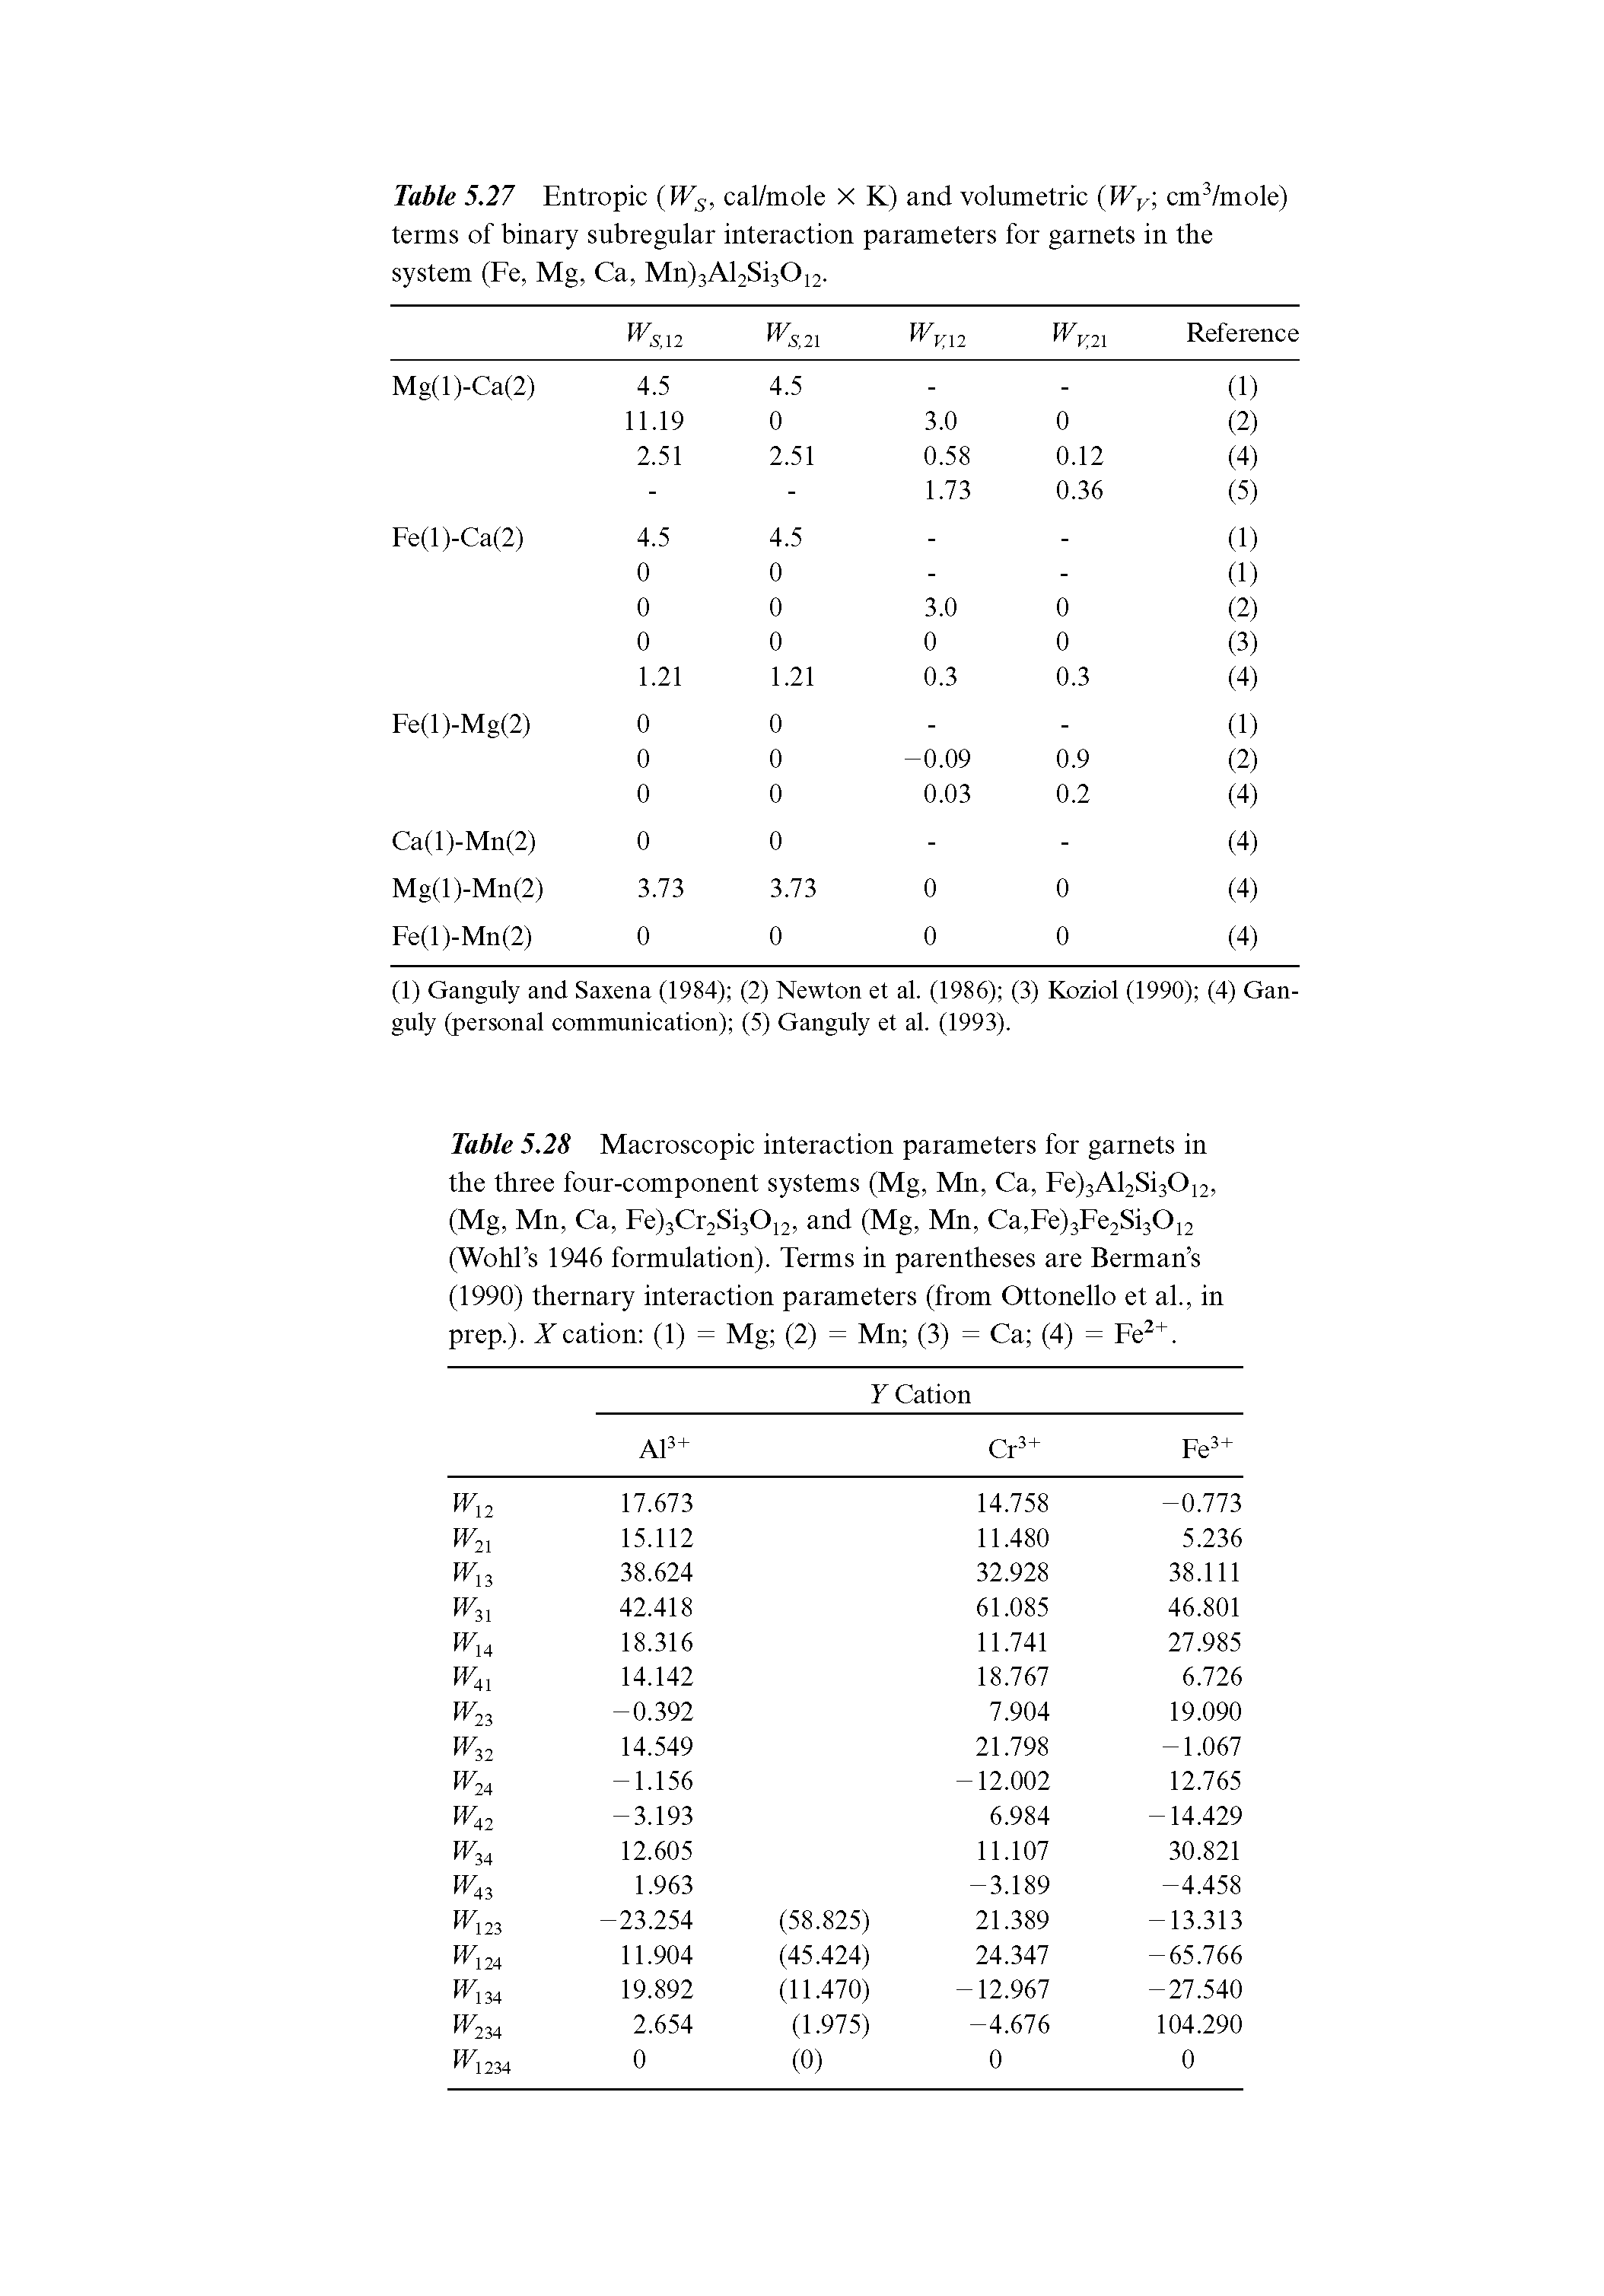 Table 5.28 Macroscopic interaction parameters for garnets in the three four-component systems (Mg, Mn, Ca, Fe)3Al2Sl30i2, (Mg, Mn, Ca, Fe)3Cr2Sl30i2, and (Mg, Mn, Ca,Fe)3Fc2Si30i2 (Wohl s 1946 formulation). Terms in parentheses are Berman s (1990) thernary interaction parameters (from Ottonello et al., in prep.). Xcation (1) = Mg (2) = Mn (3) = Ca (4) = Fe. ...